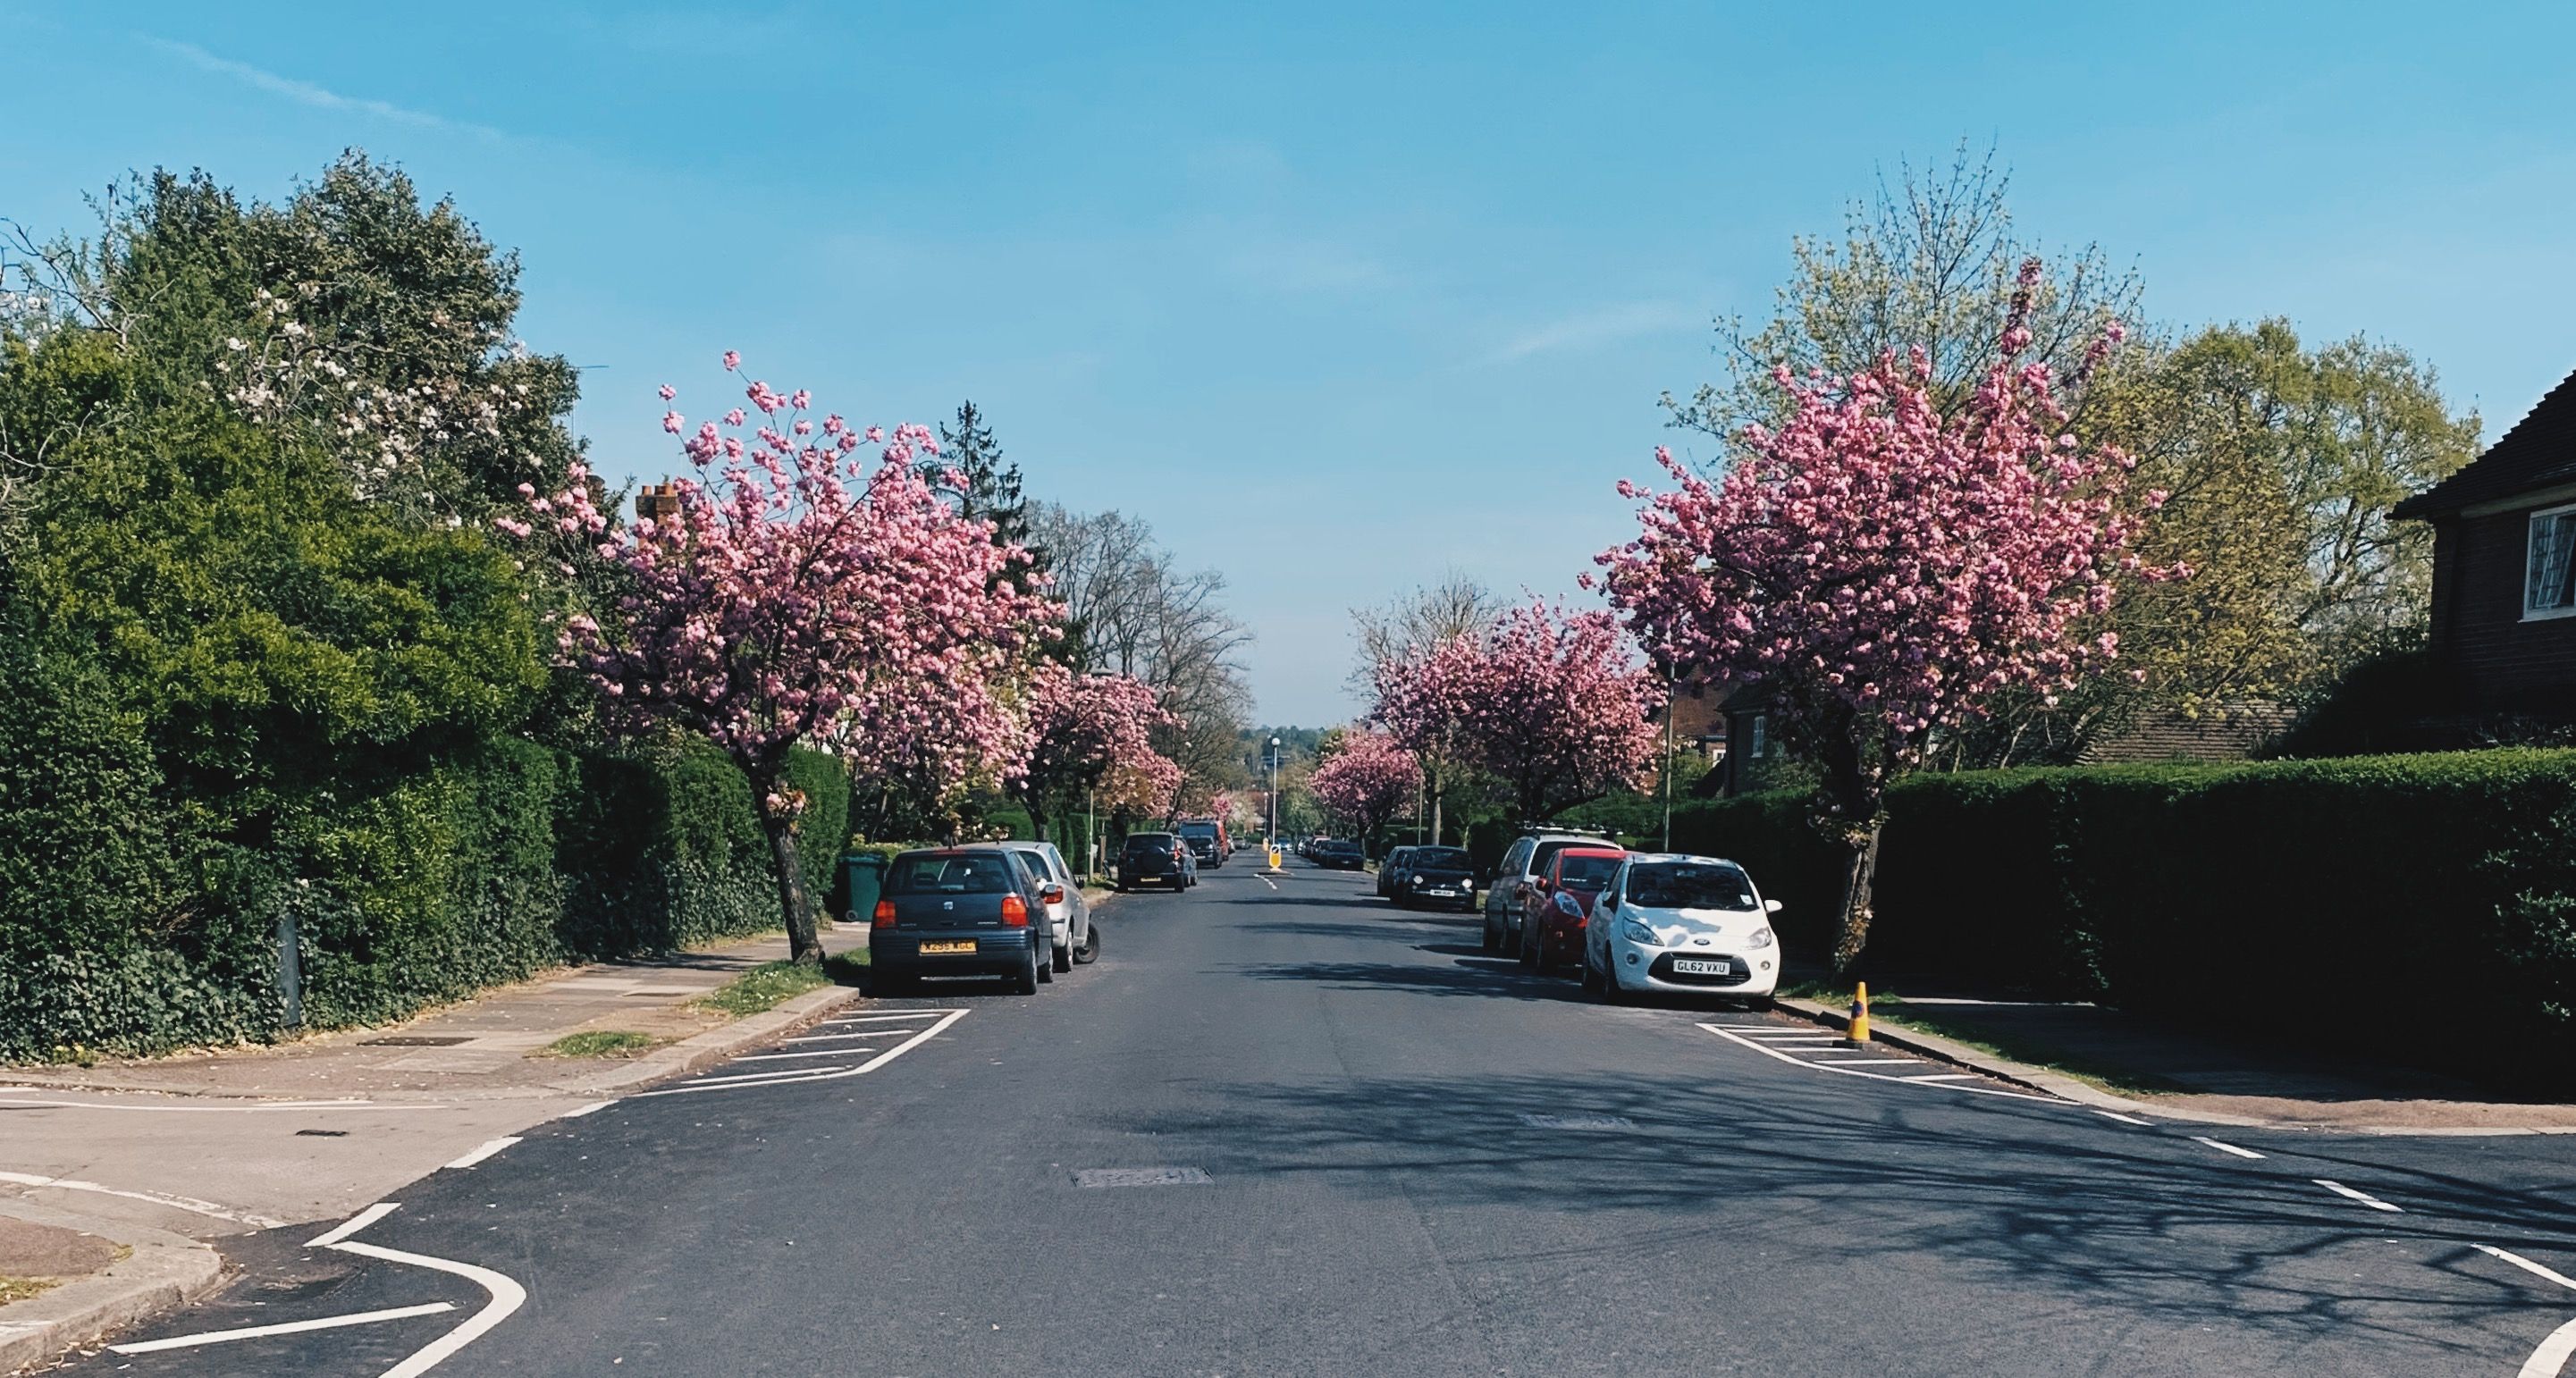 Blossom on Meadway